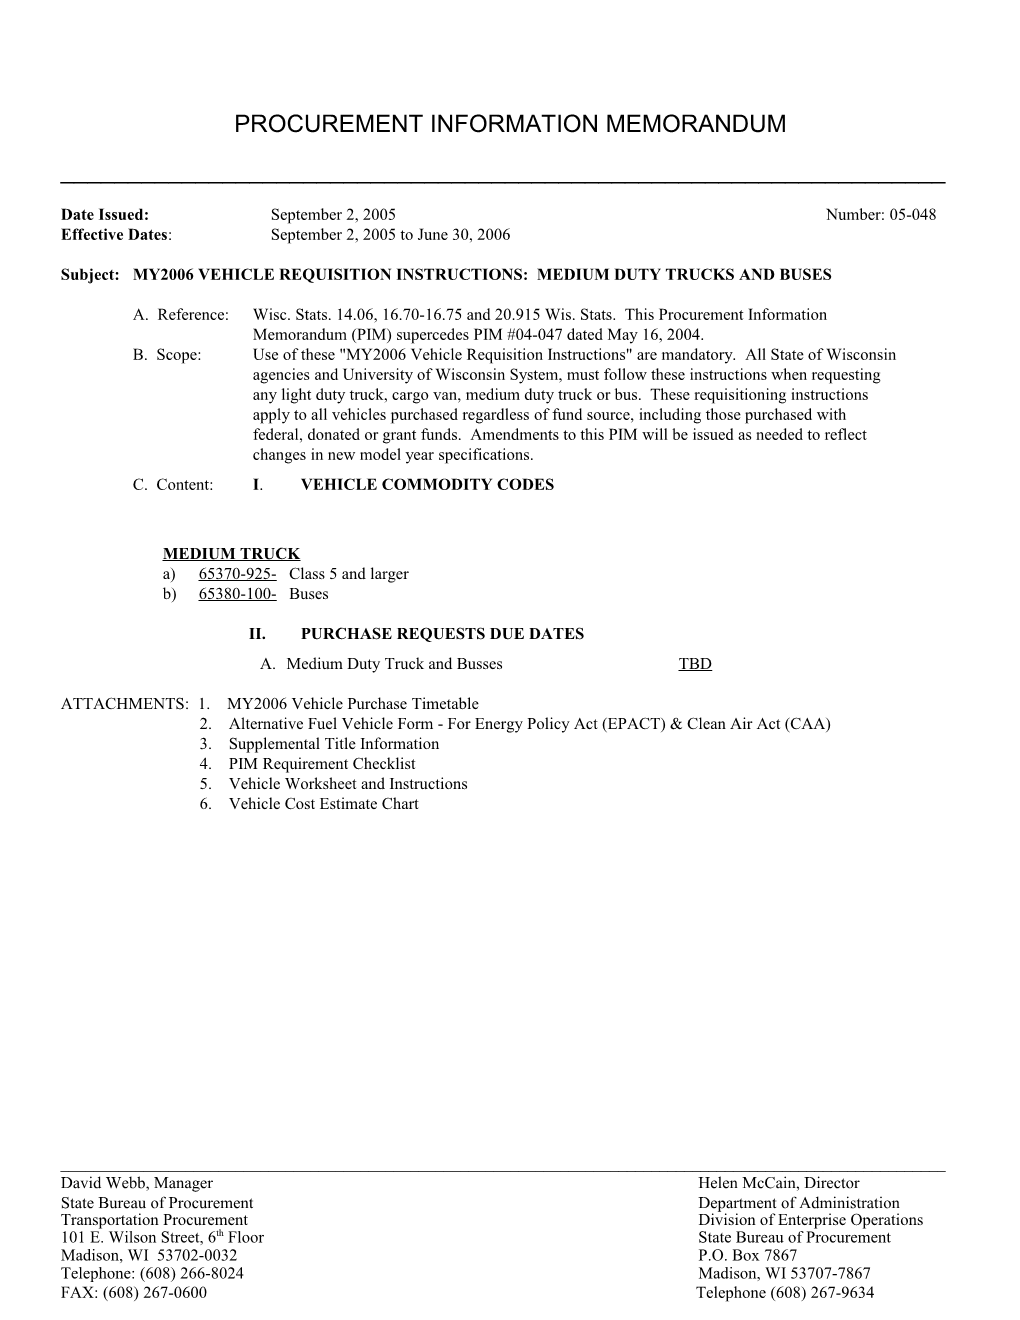 Subject:MY2006 VEHICLE REQUISITION INSTRUCTIONS: MEDIUM DUTY TRUCKS and BUSES